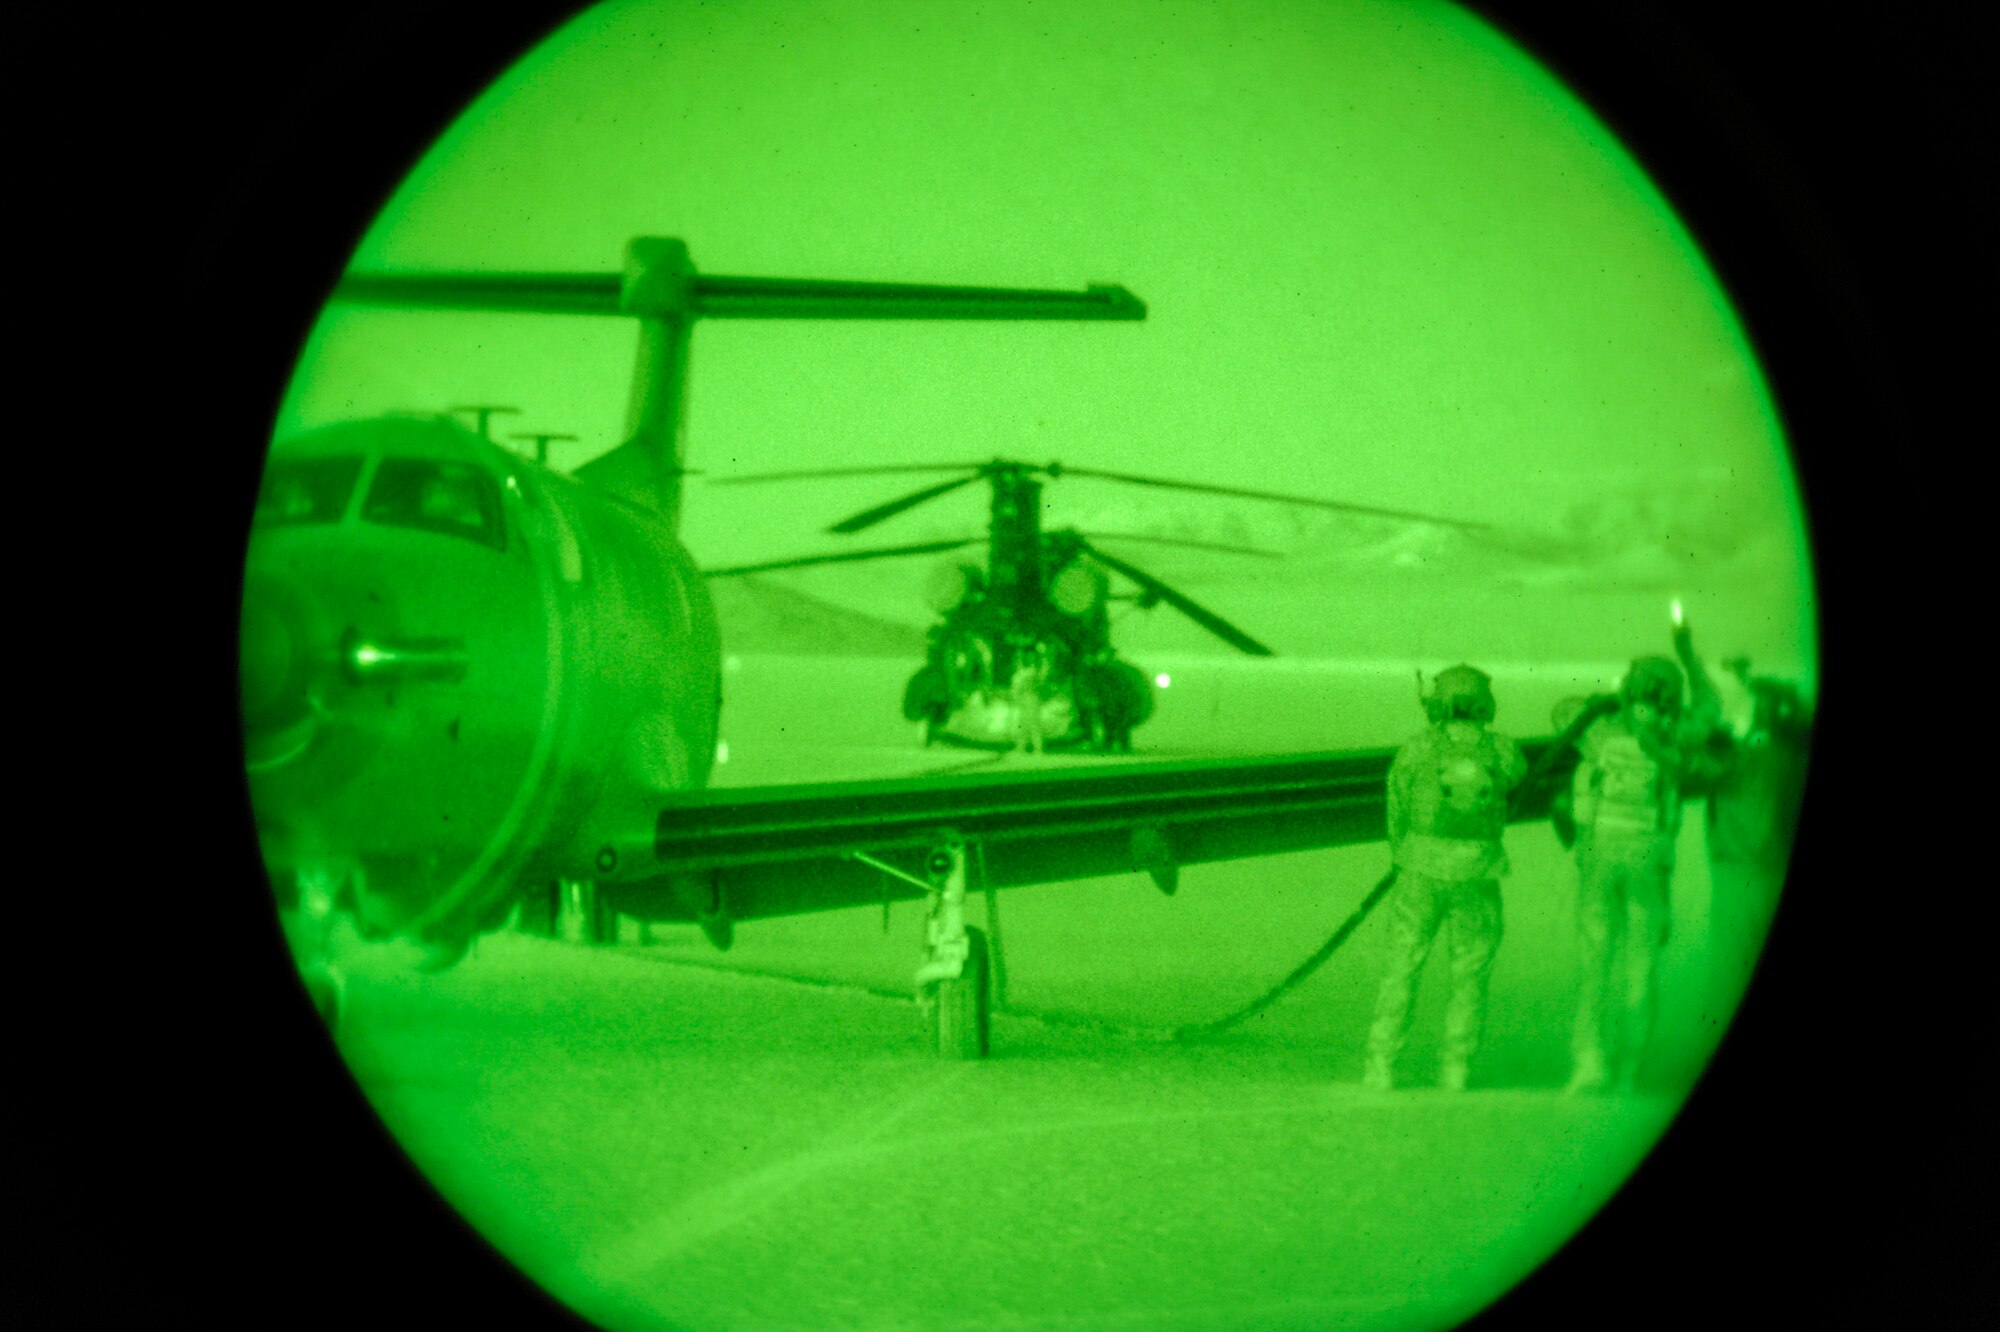 Personnel assigned to the 14th Weapons Squadron, 160th Special Operations Aviation Regiment and 66th WPS execute a landing zone security and forward area refueling point operations between an Army MH-47 and Air Force U-28 aircraft in support of the U.S. Air Force Weapons School Integration Exercise Special Operations Forces Hostage Recovery Mission.  The mission featured 17 aircraft, and more than 200 Army and Air Force personnel. (U.S. Air Force photo by Major Richie Harr,)